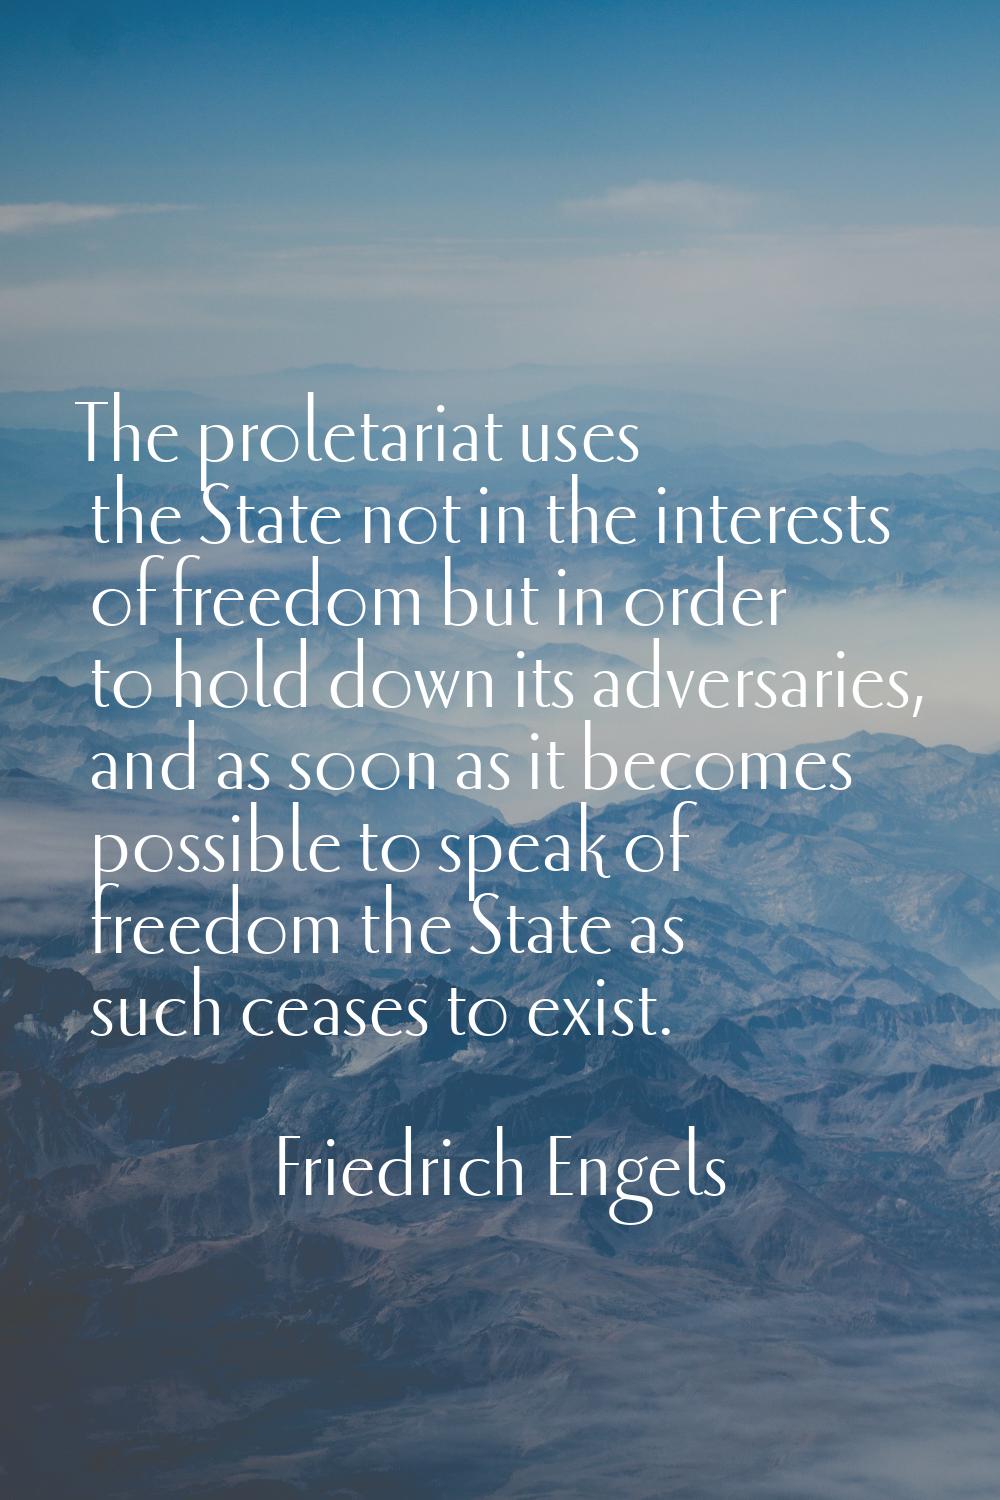 The proletariat uses the State not in the interests of freedom but in order to hold down its advers